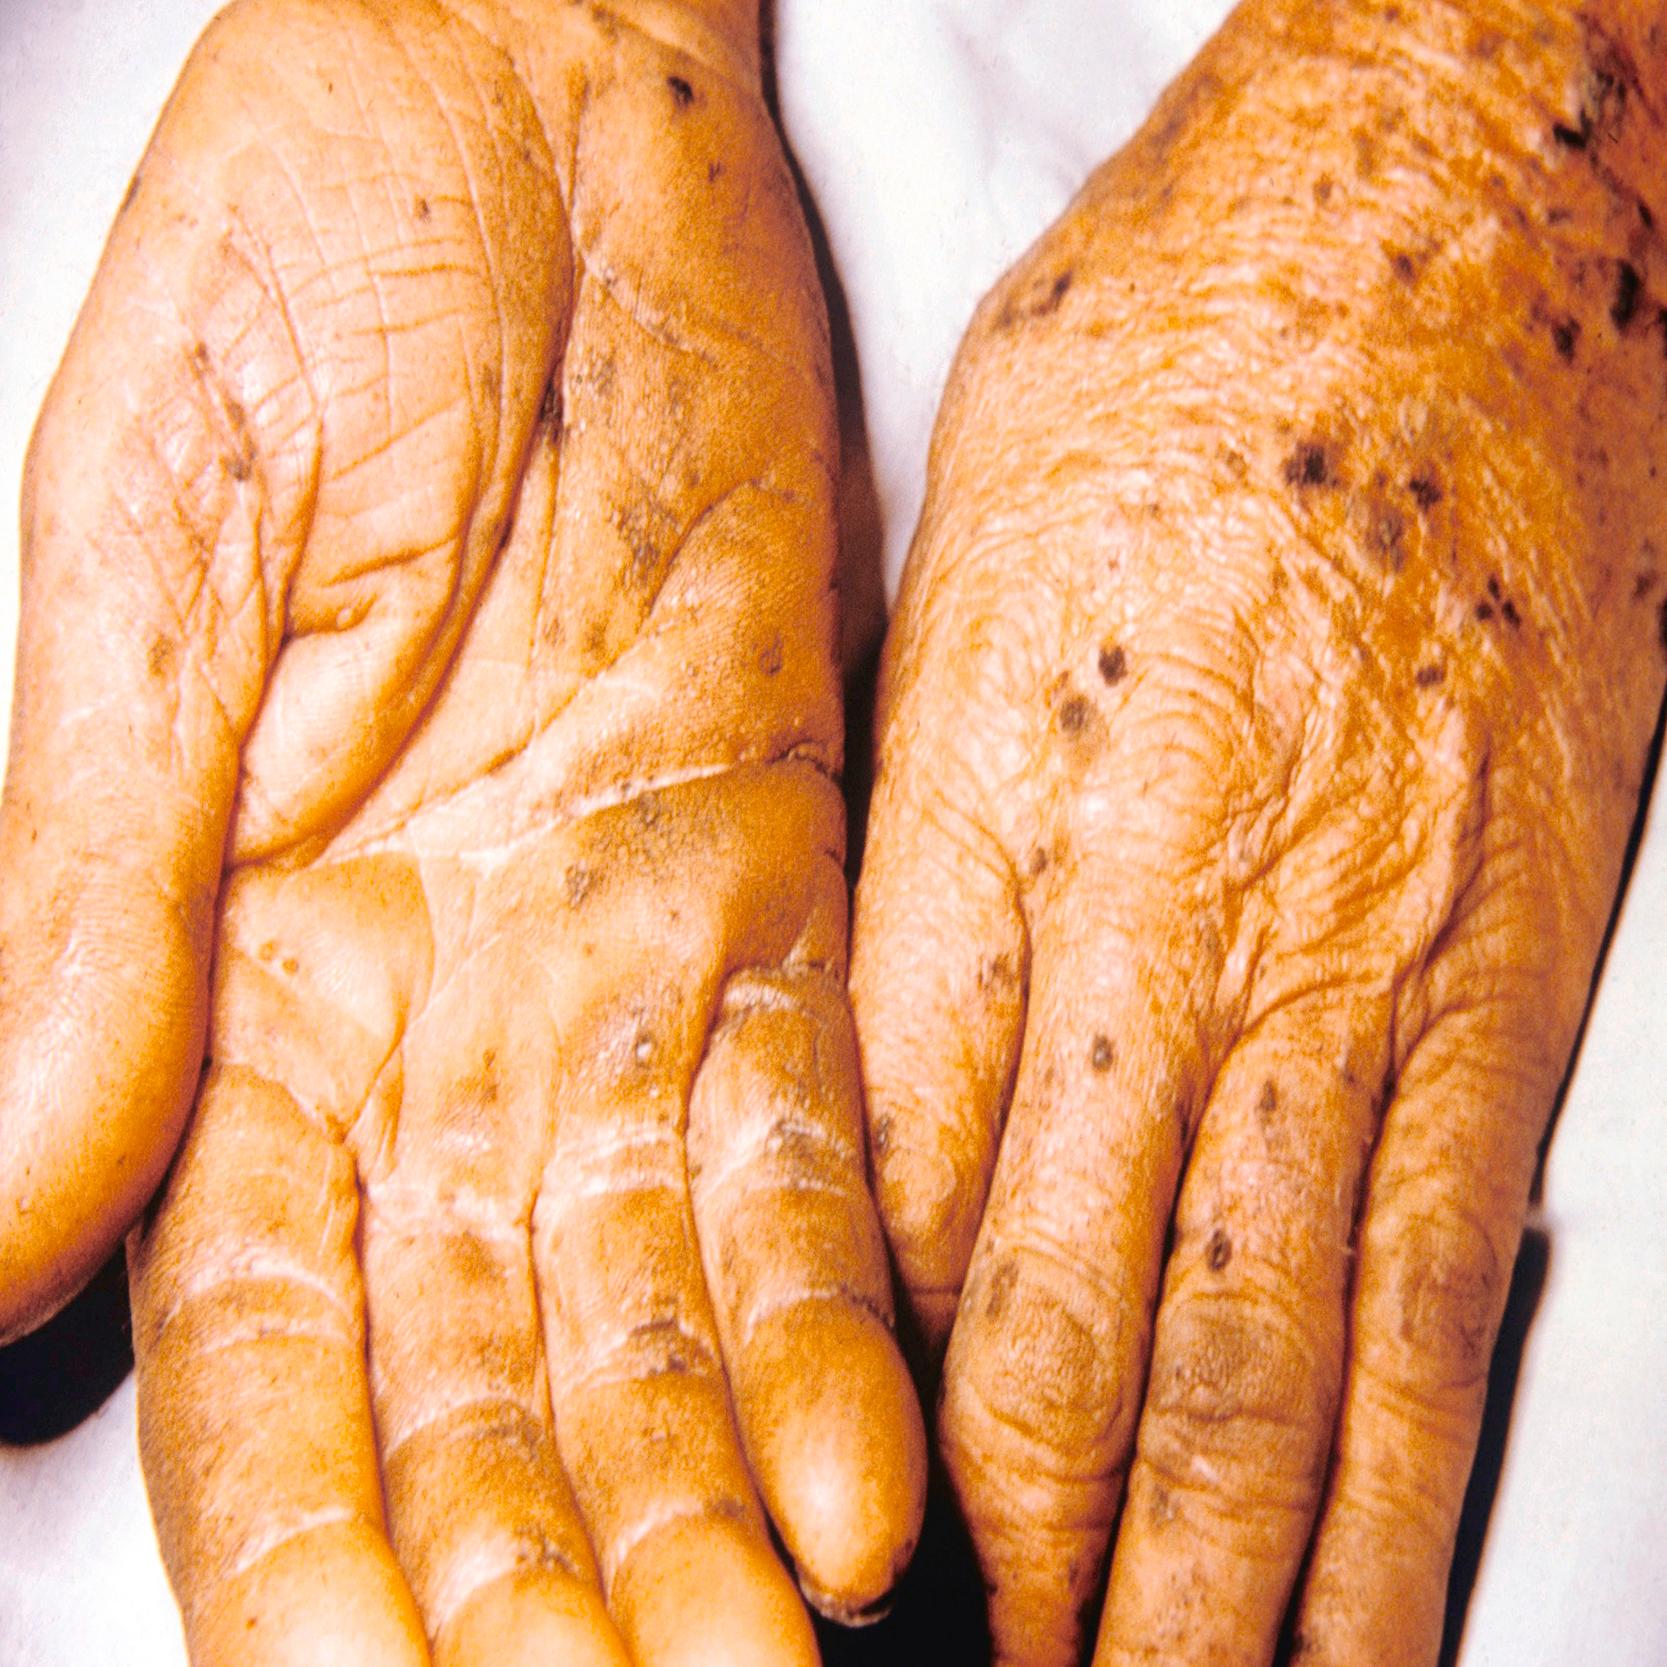 eFIG. 7.2, Arsenical keratoses: Signs of arsenic poisoning demonstrating hyperpigmented keratotic papules on the palms and dorsal hands.